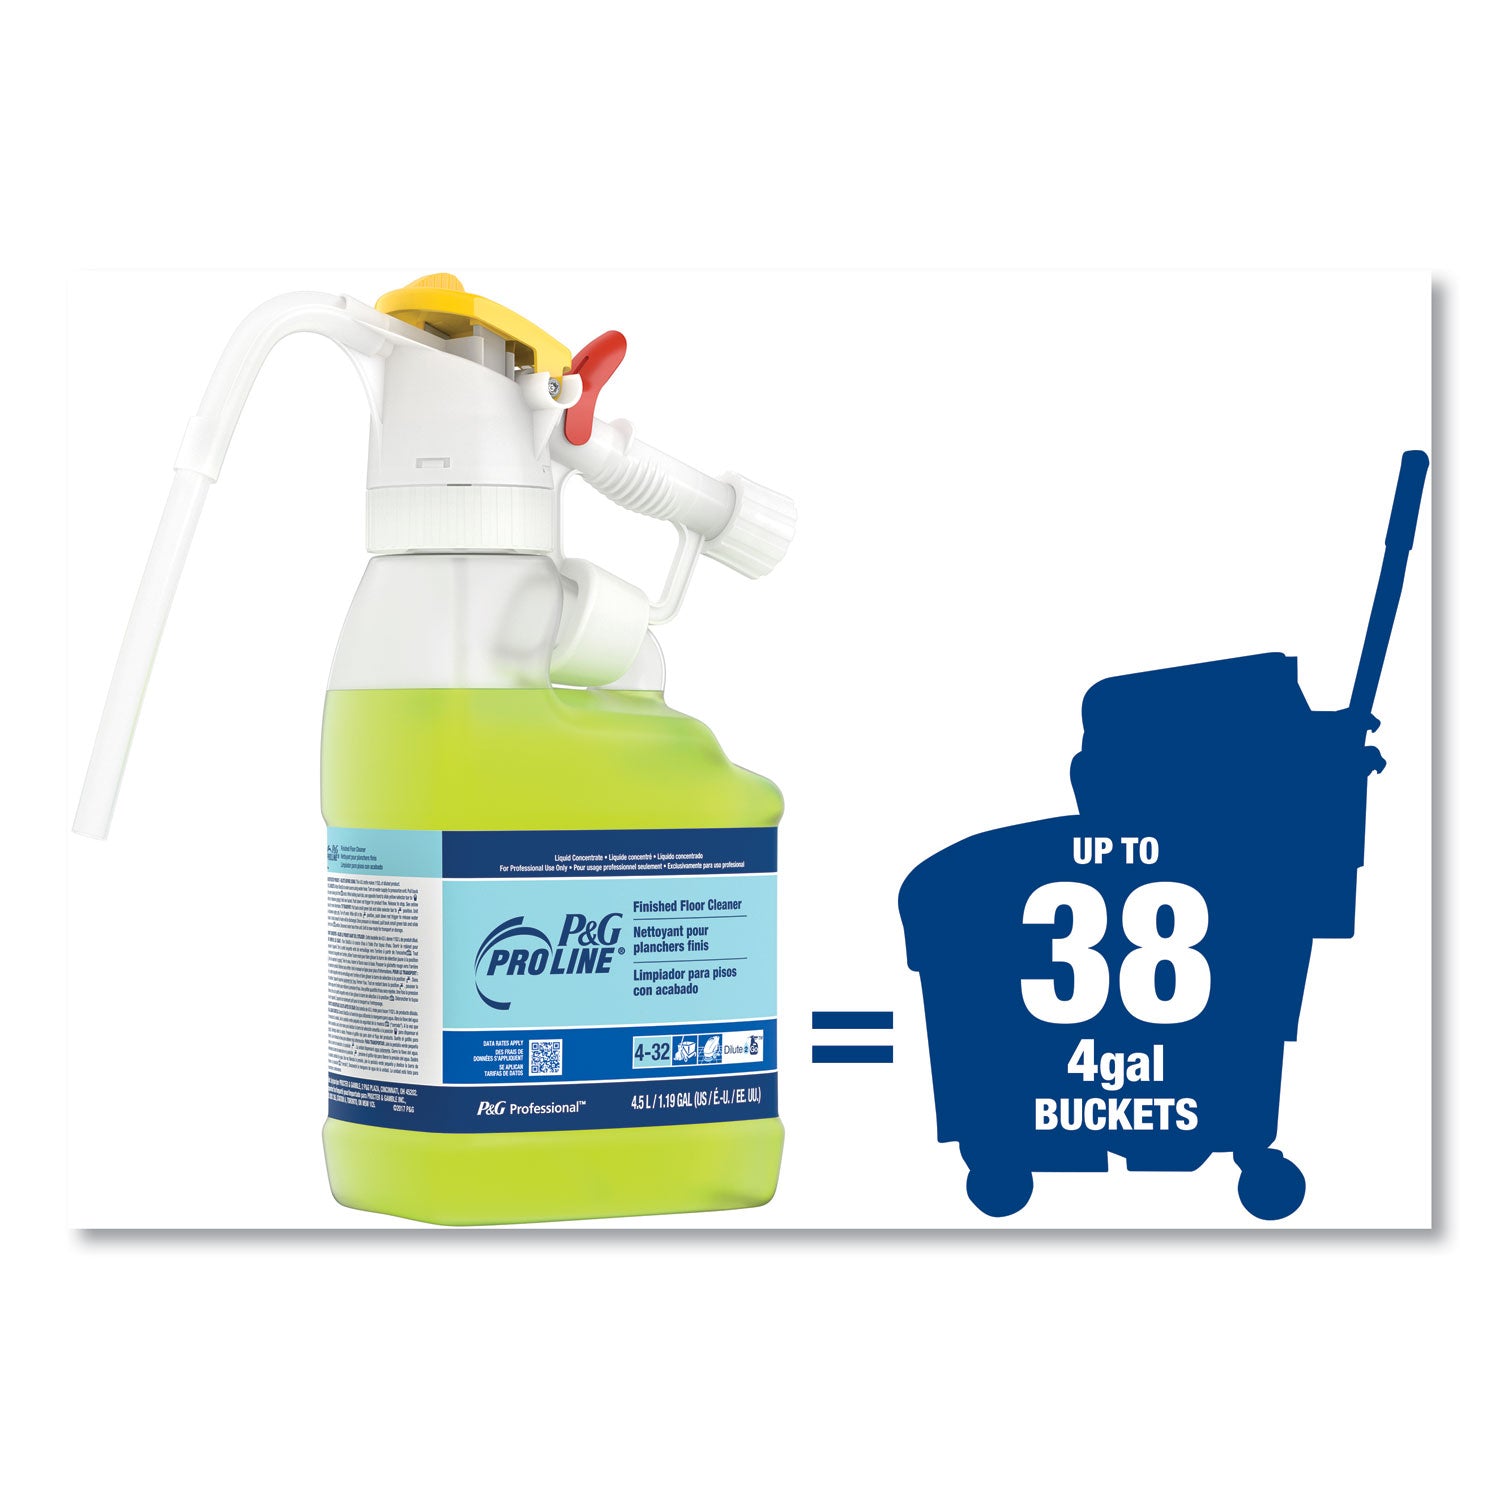 dilute-2-go-p-and-g-pro-line-finished-floor-cleaner-fresh-scent-45-l-jug-1-carton_pgc72003 - 7